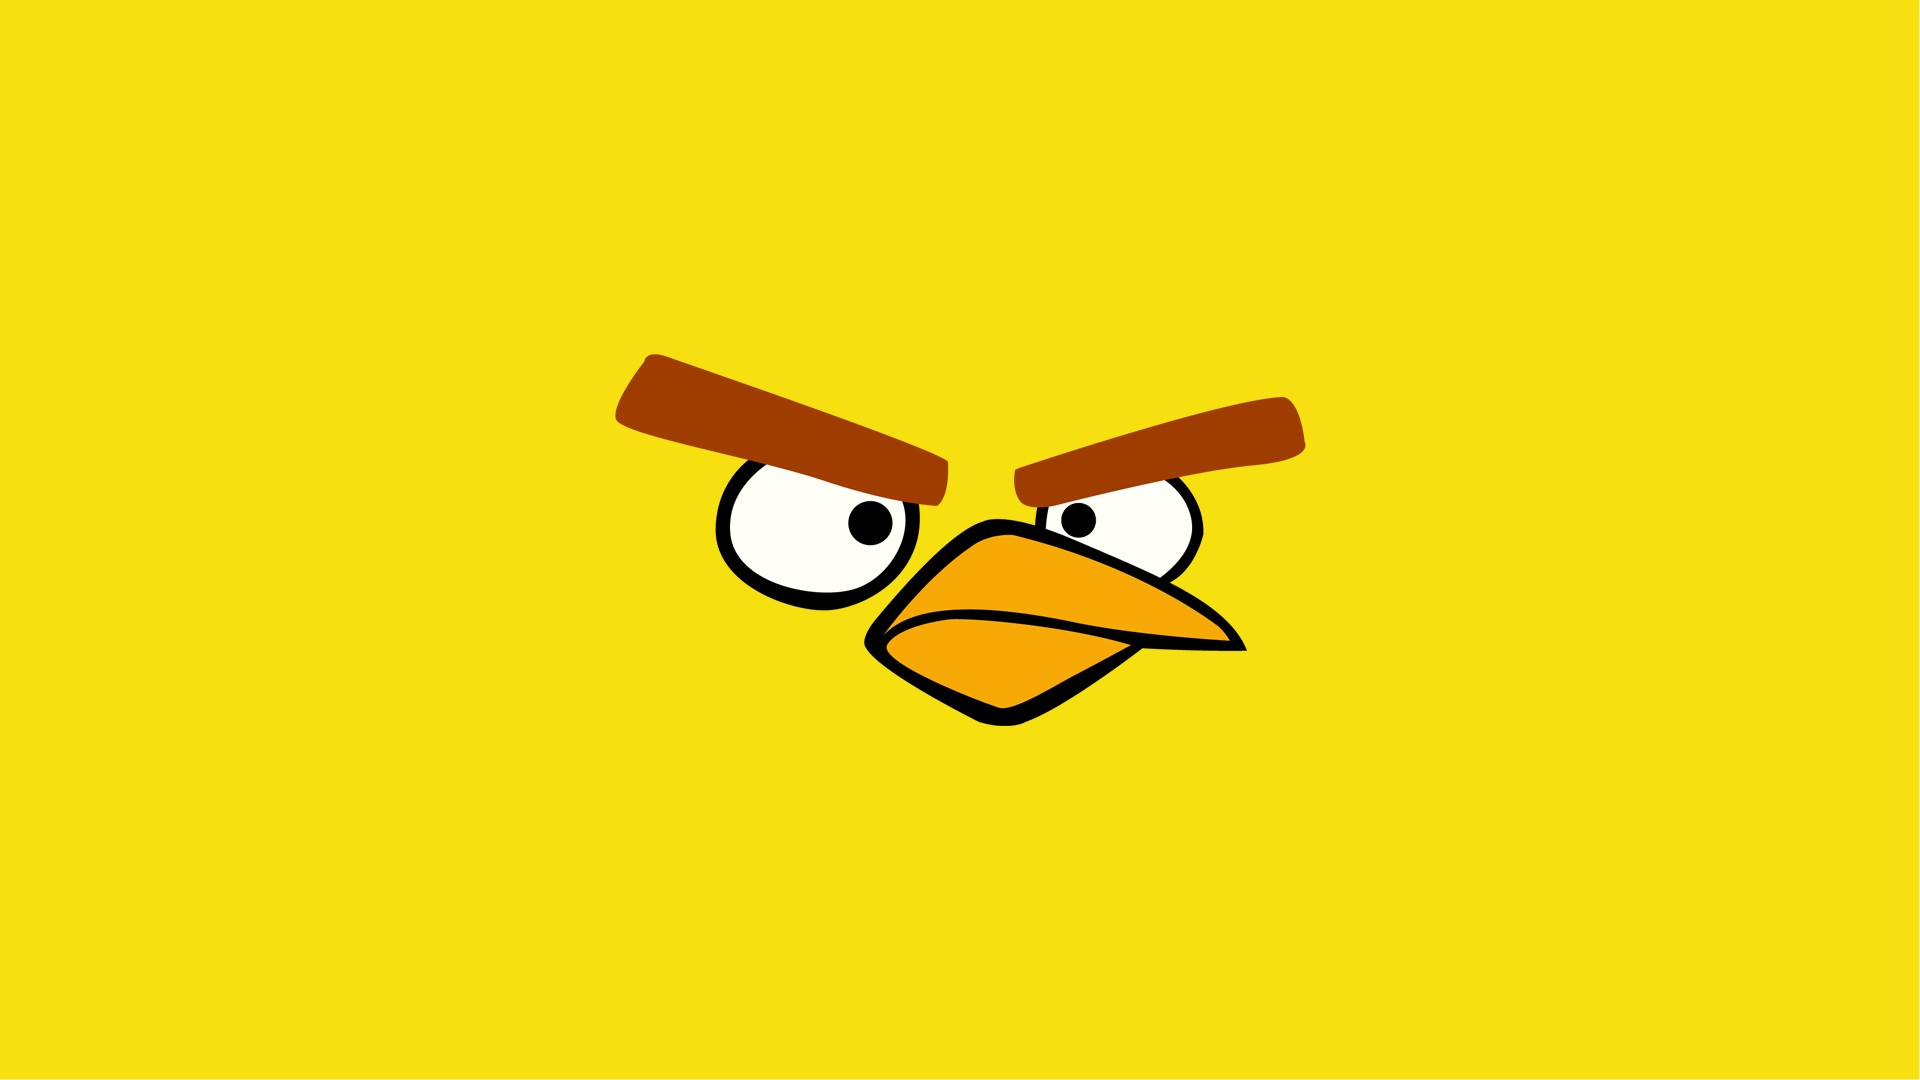 Angry Face Wallpaper - ClipArt Best